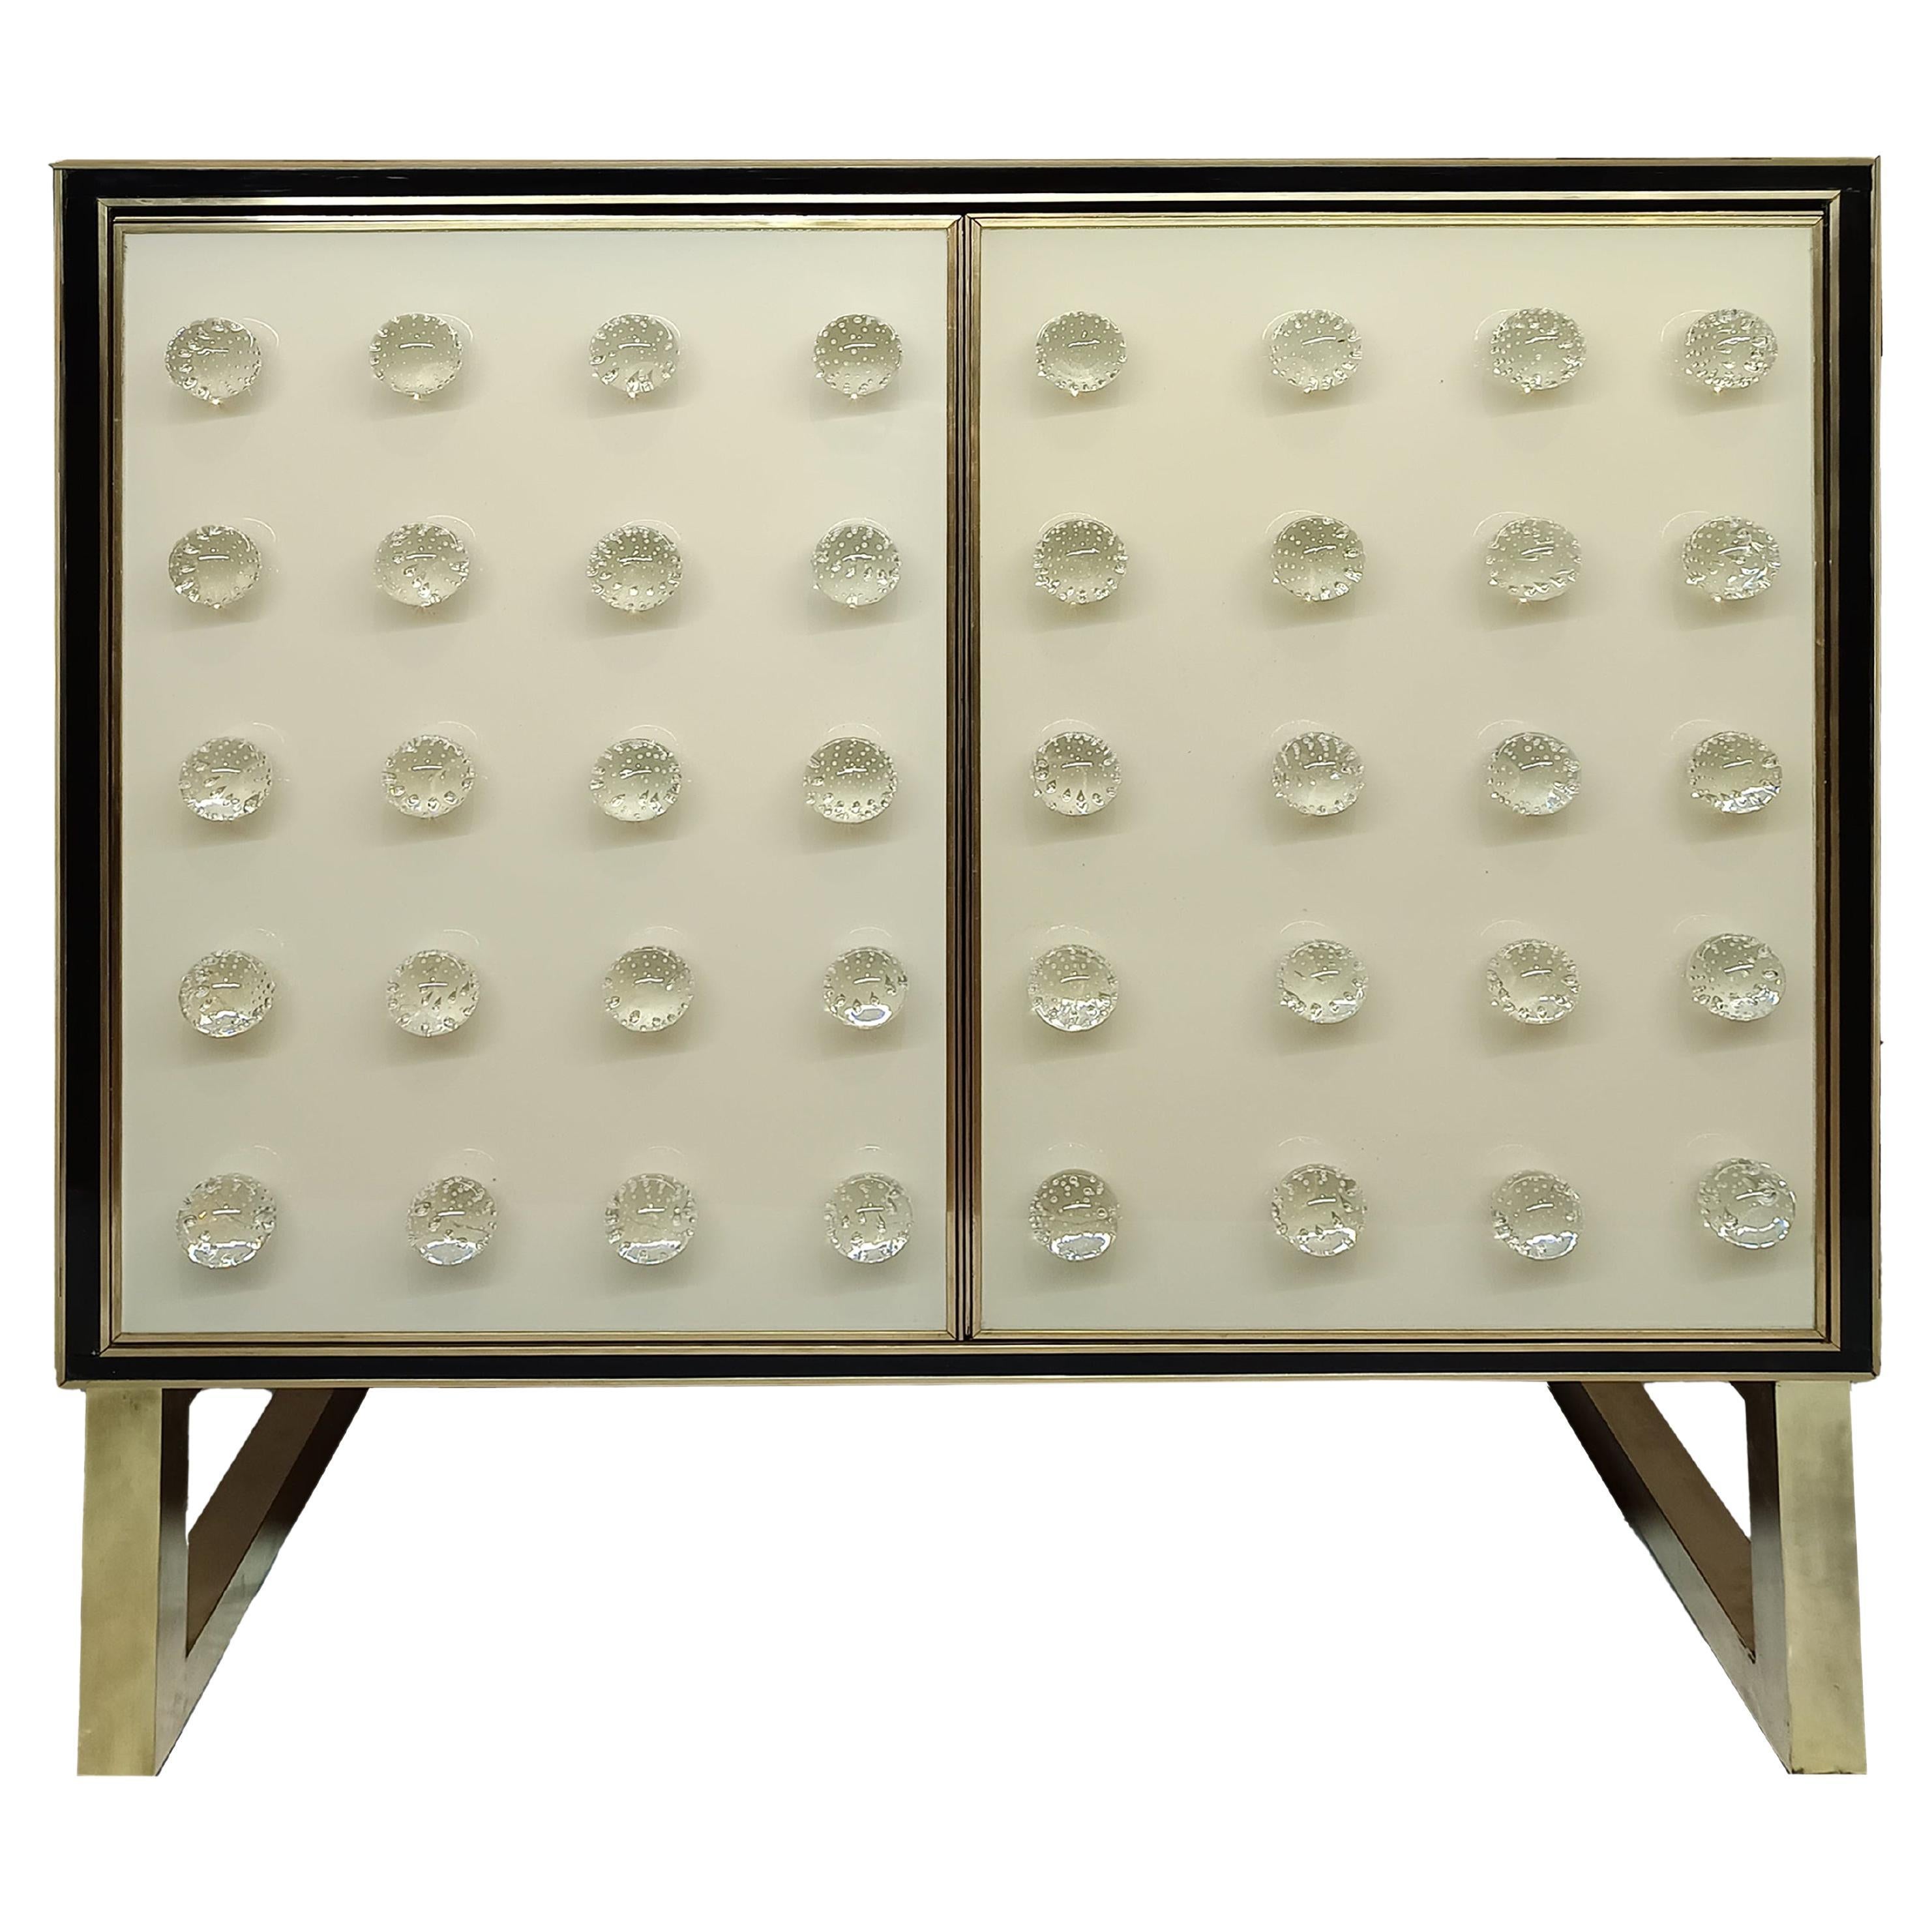 Spectacular White & Black Cabinet in Murano Glass Made in Italy Available